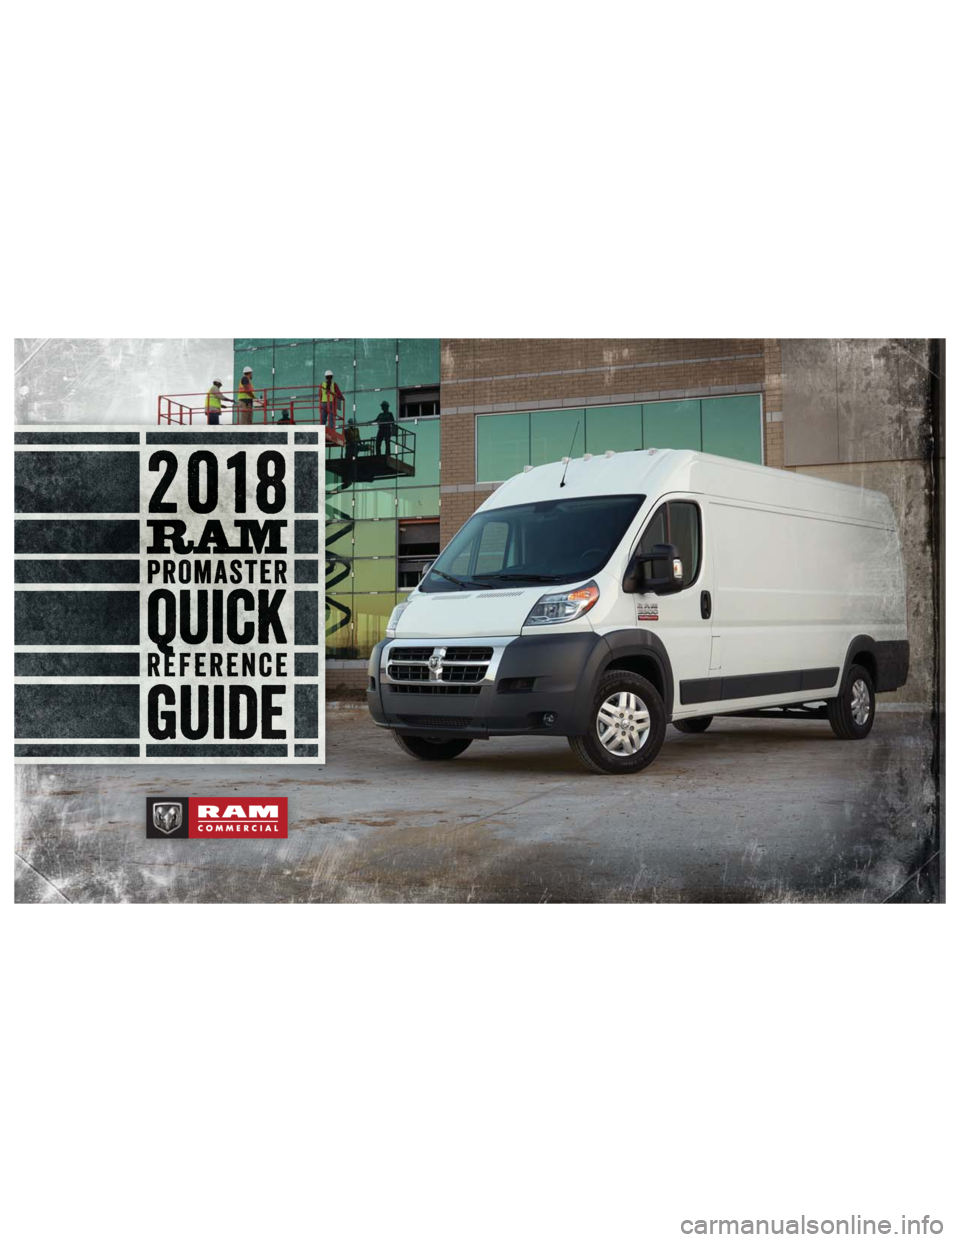 Ram ProMaster 2018  Quick Reference Guide PPPPPPPPPPPPPPPPPPPPPPPPPPPPPPPPPPPPPPPPPPPPPPPPPPPPPPPPPPPPPPPPPPPPPPPPPPPPPPPPPPPPPPPPPPPPPPPPPPPRRRRRRRRRRRRRRRRRRRRRRRRRRRRRRRRRRRRRRRRRRRRRRRRRRRRRRRRRRRRRRRRRRRRRRRRRRRRRRRRRRRRRRRRRRRRRRRRRRRRR